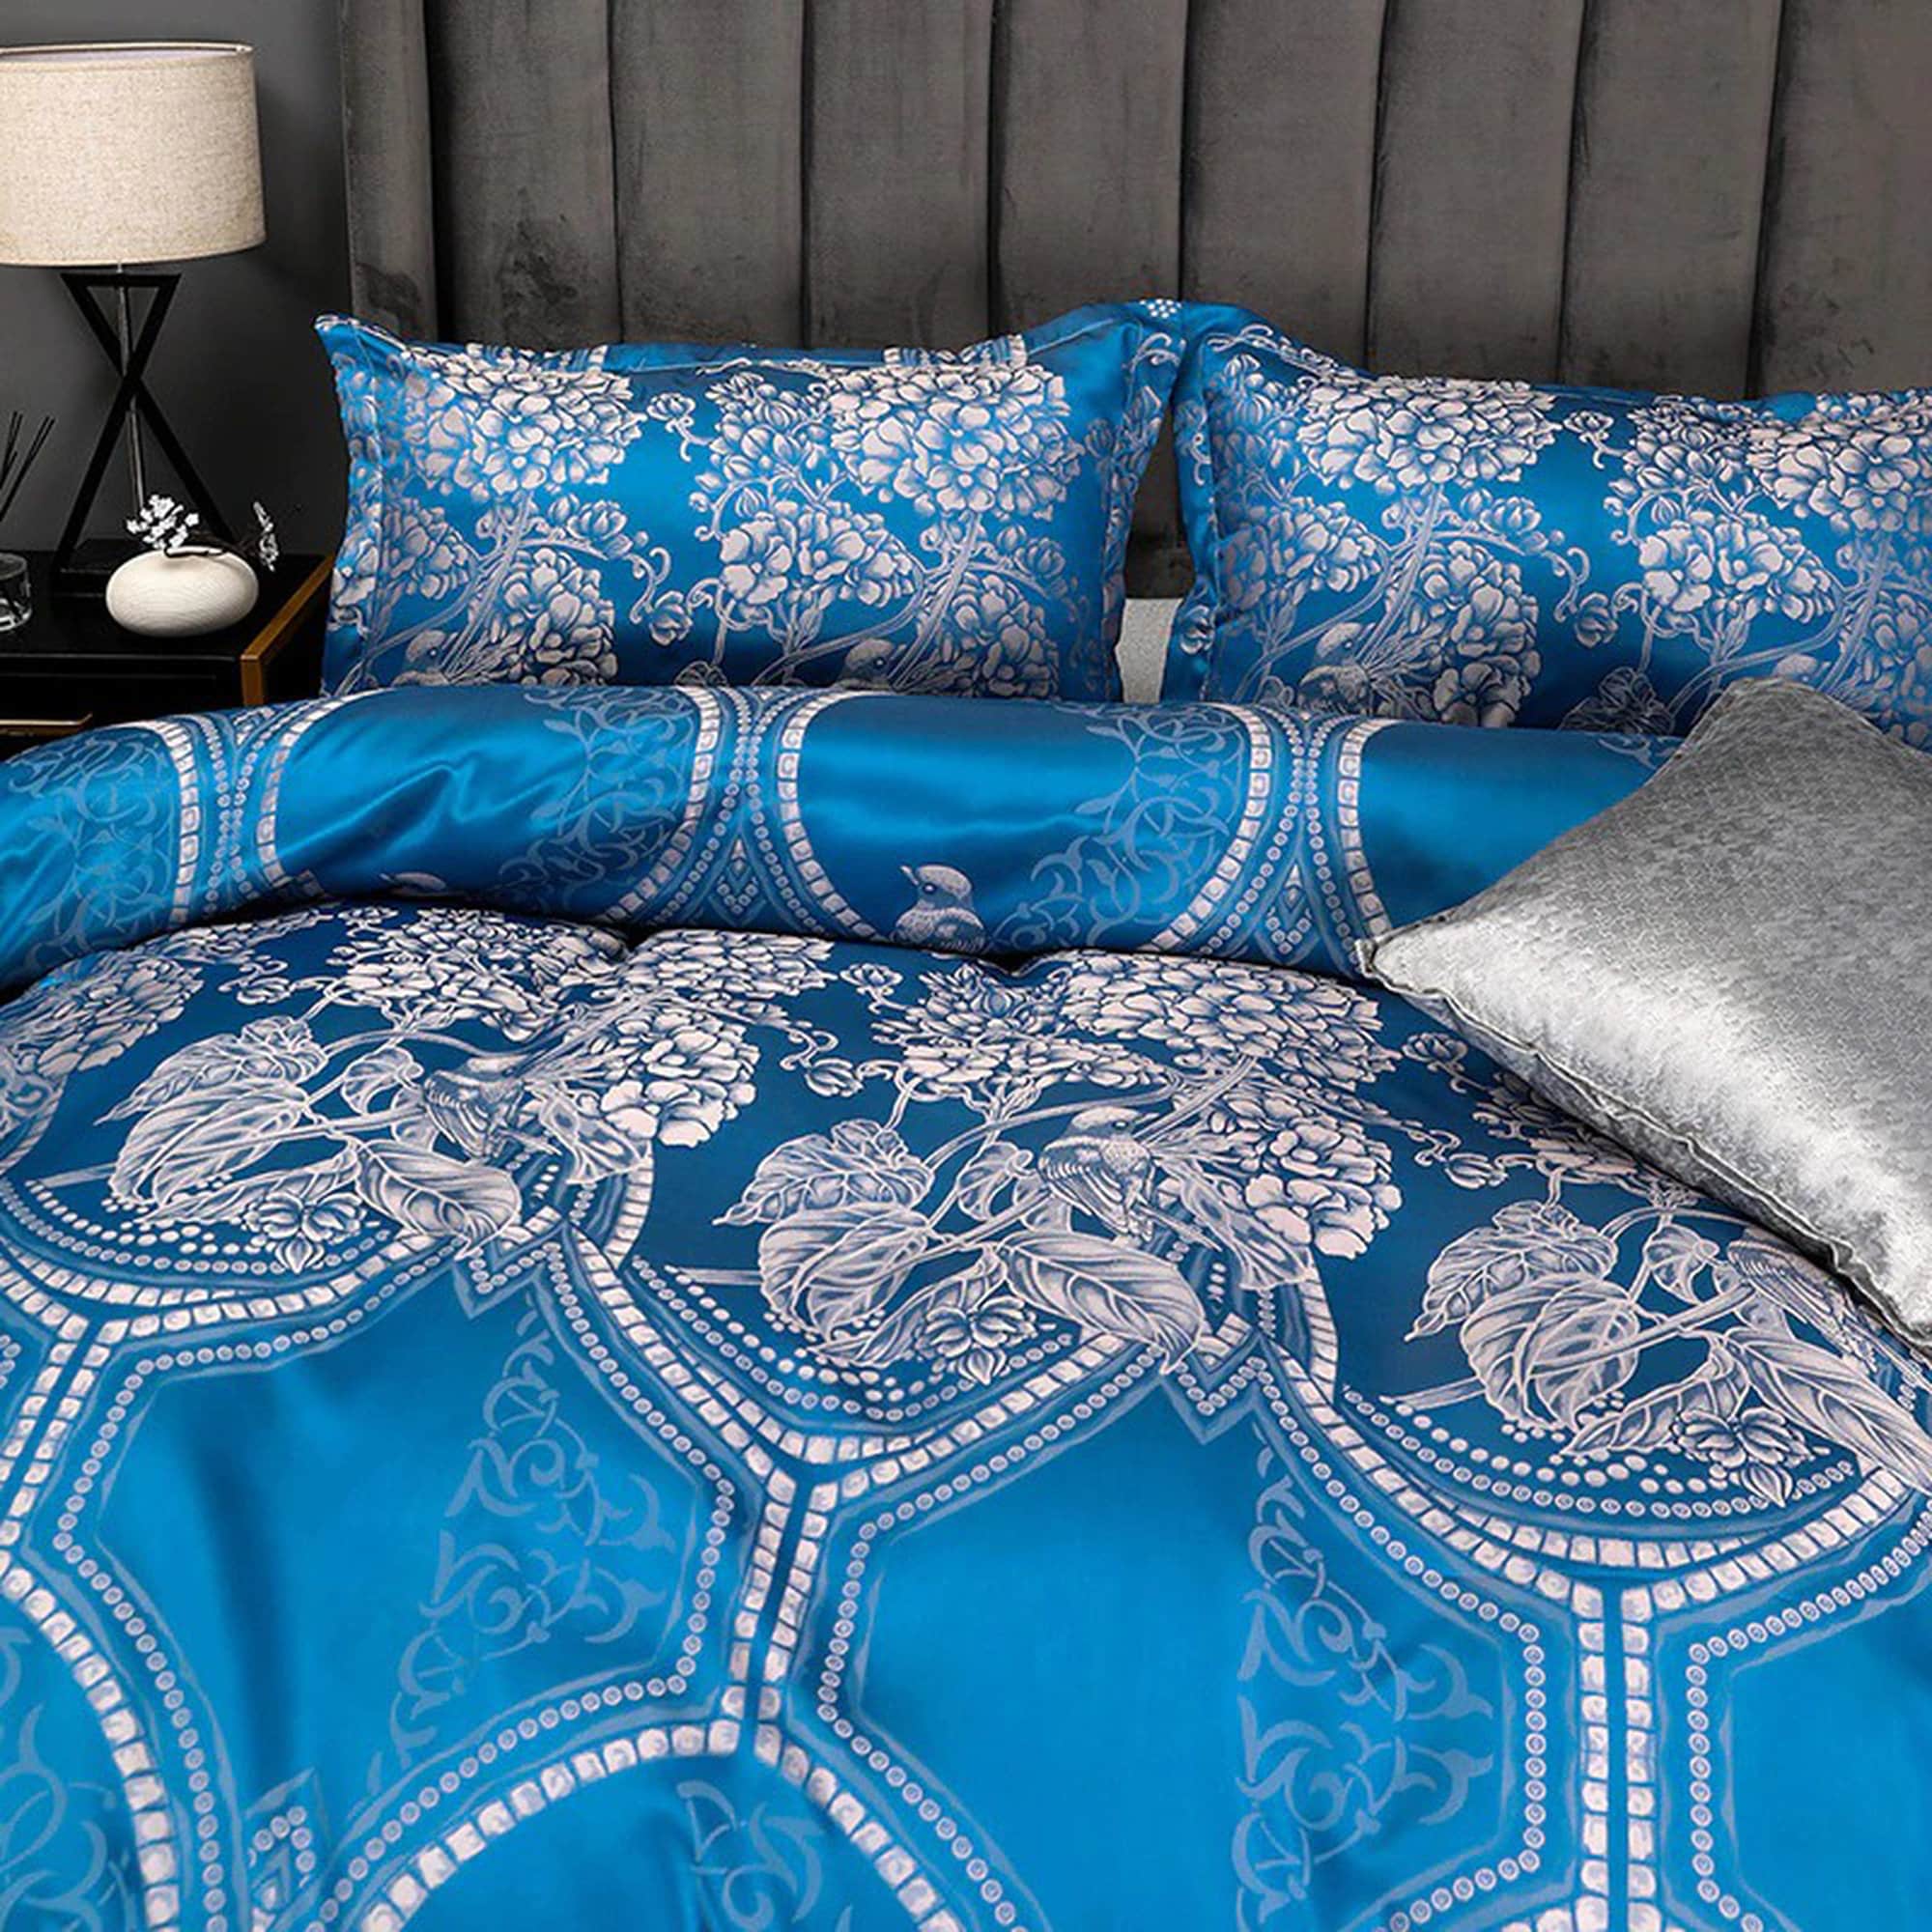 daintyduvet Cerulean Blue Bedding Made with Silky Jacquard Fabric, Luxury Duvet Cover Set, Designer Bedding, Aesthetic Duvet King Queen Full Twin Floral